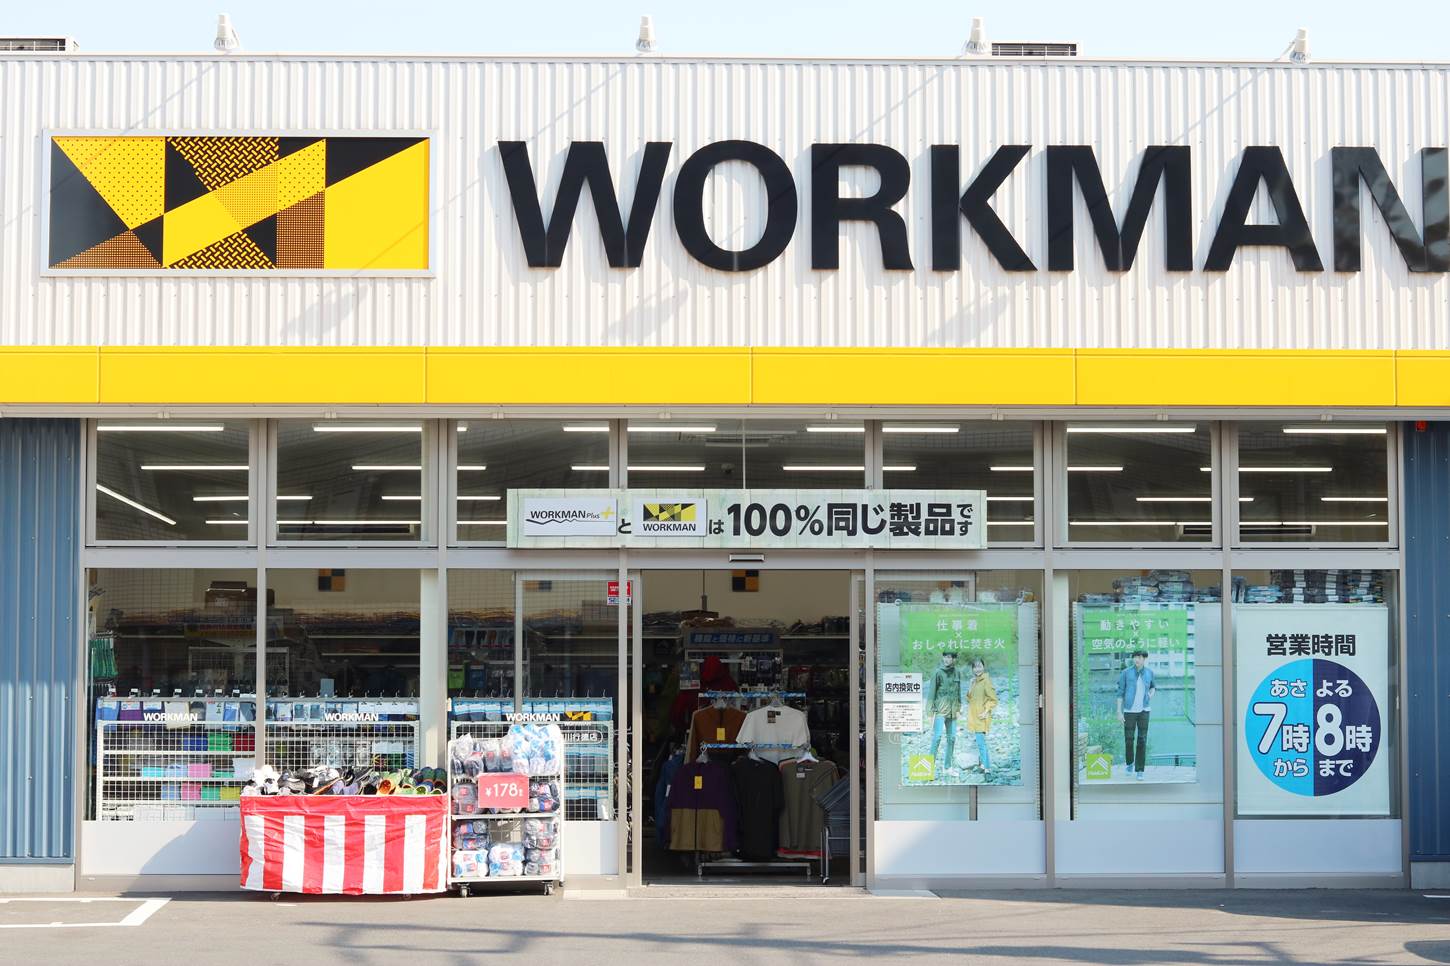 A branch of Workman, a store specialising in work clothing in Ichikawa City in Chiba Prefecture, Japan = Shutterstock